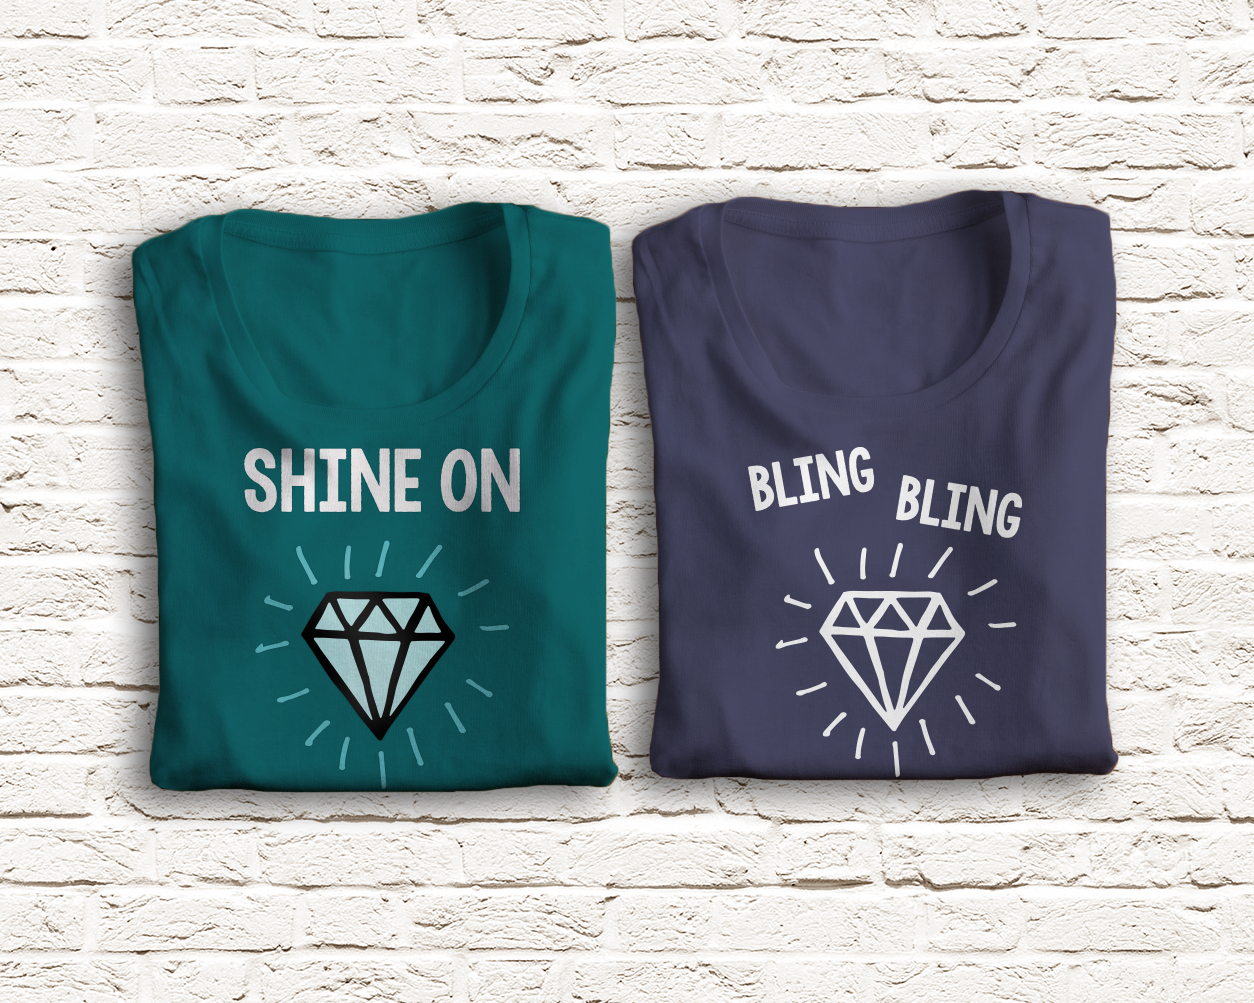 Pair of sketchy diamond designs. One says "Shine on" the other says "bling bling"